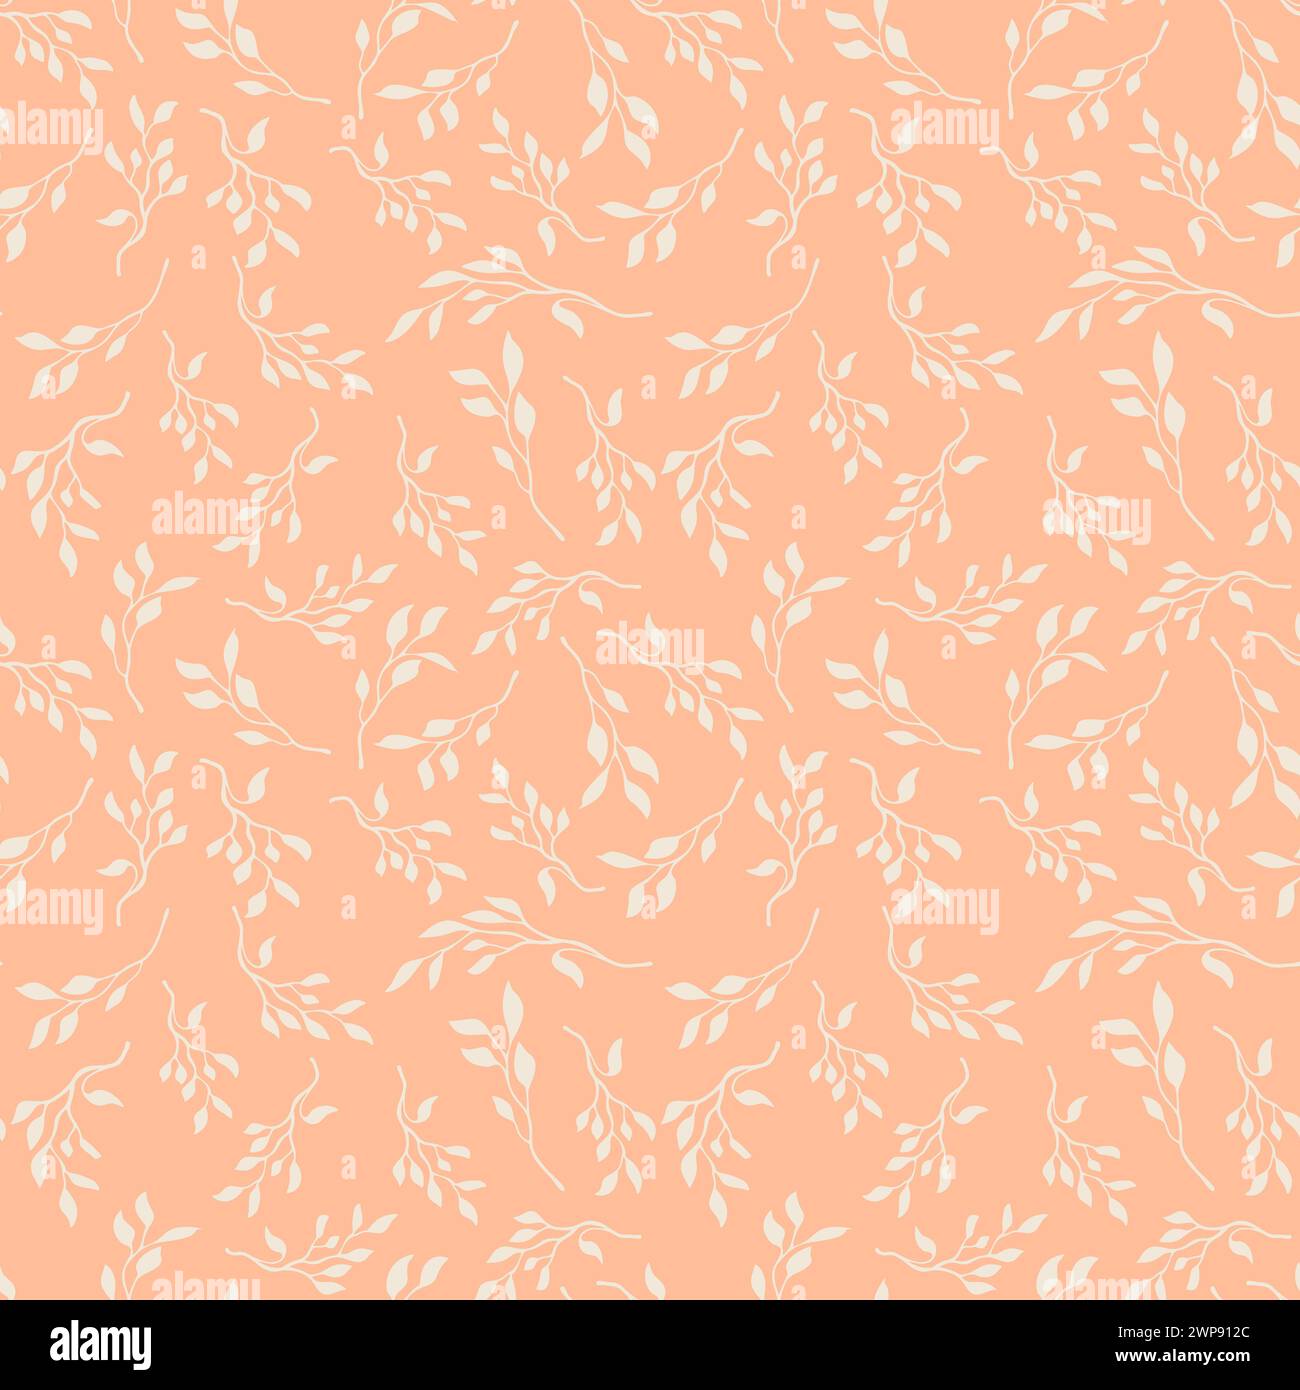 Delicate floral vine seamless pattern with hand drawn plants elements for textile fabric or wallpaper, scrapbook paper. Light peach fuzz pink vector b Stock Vector